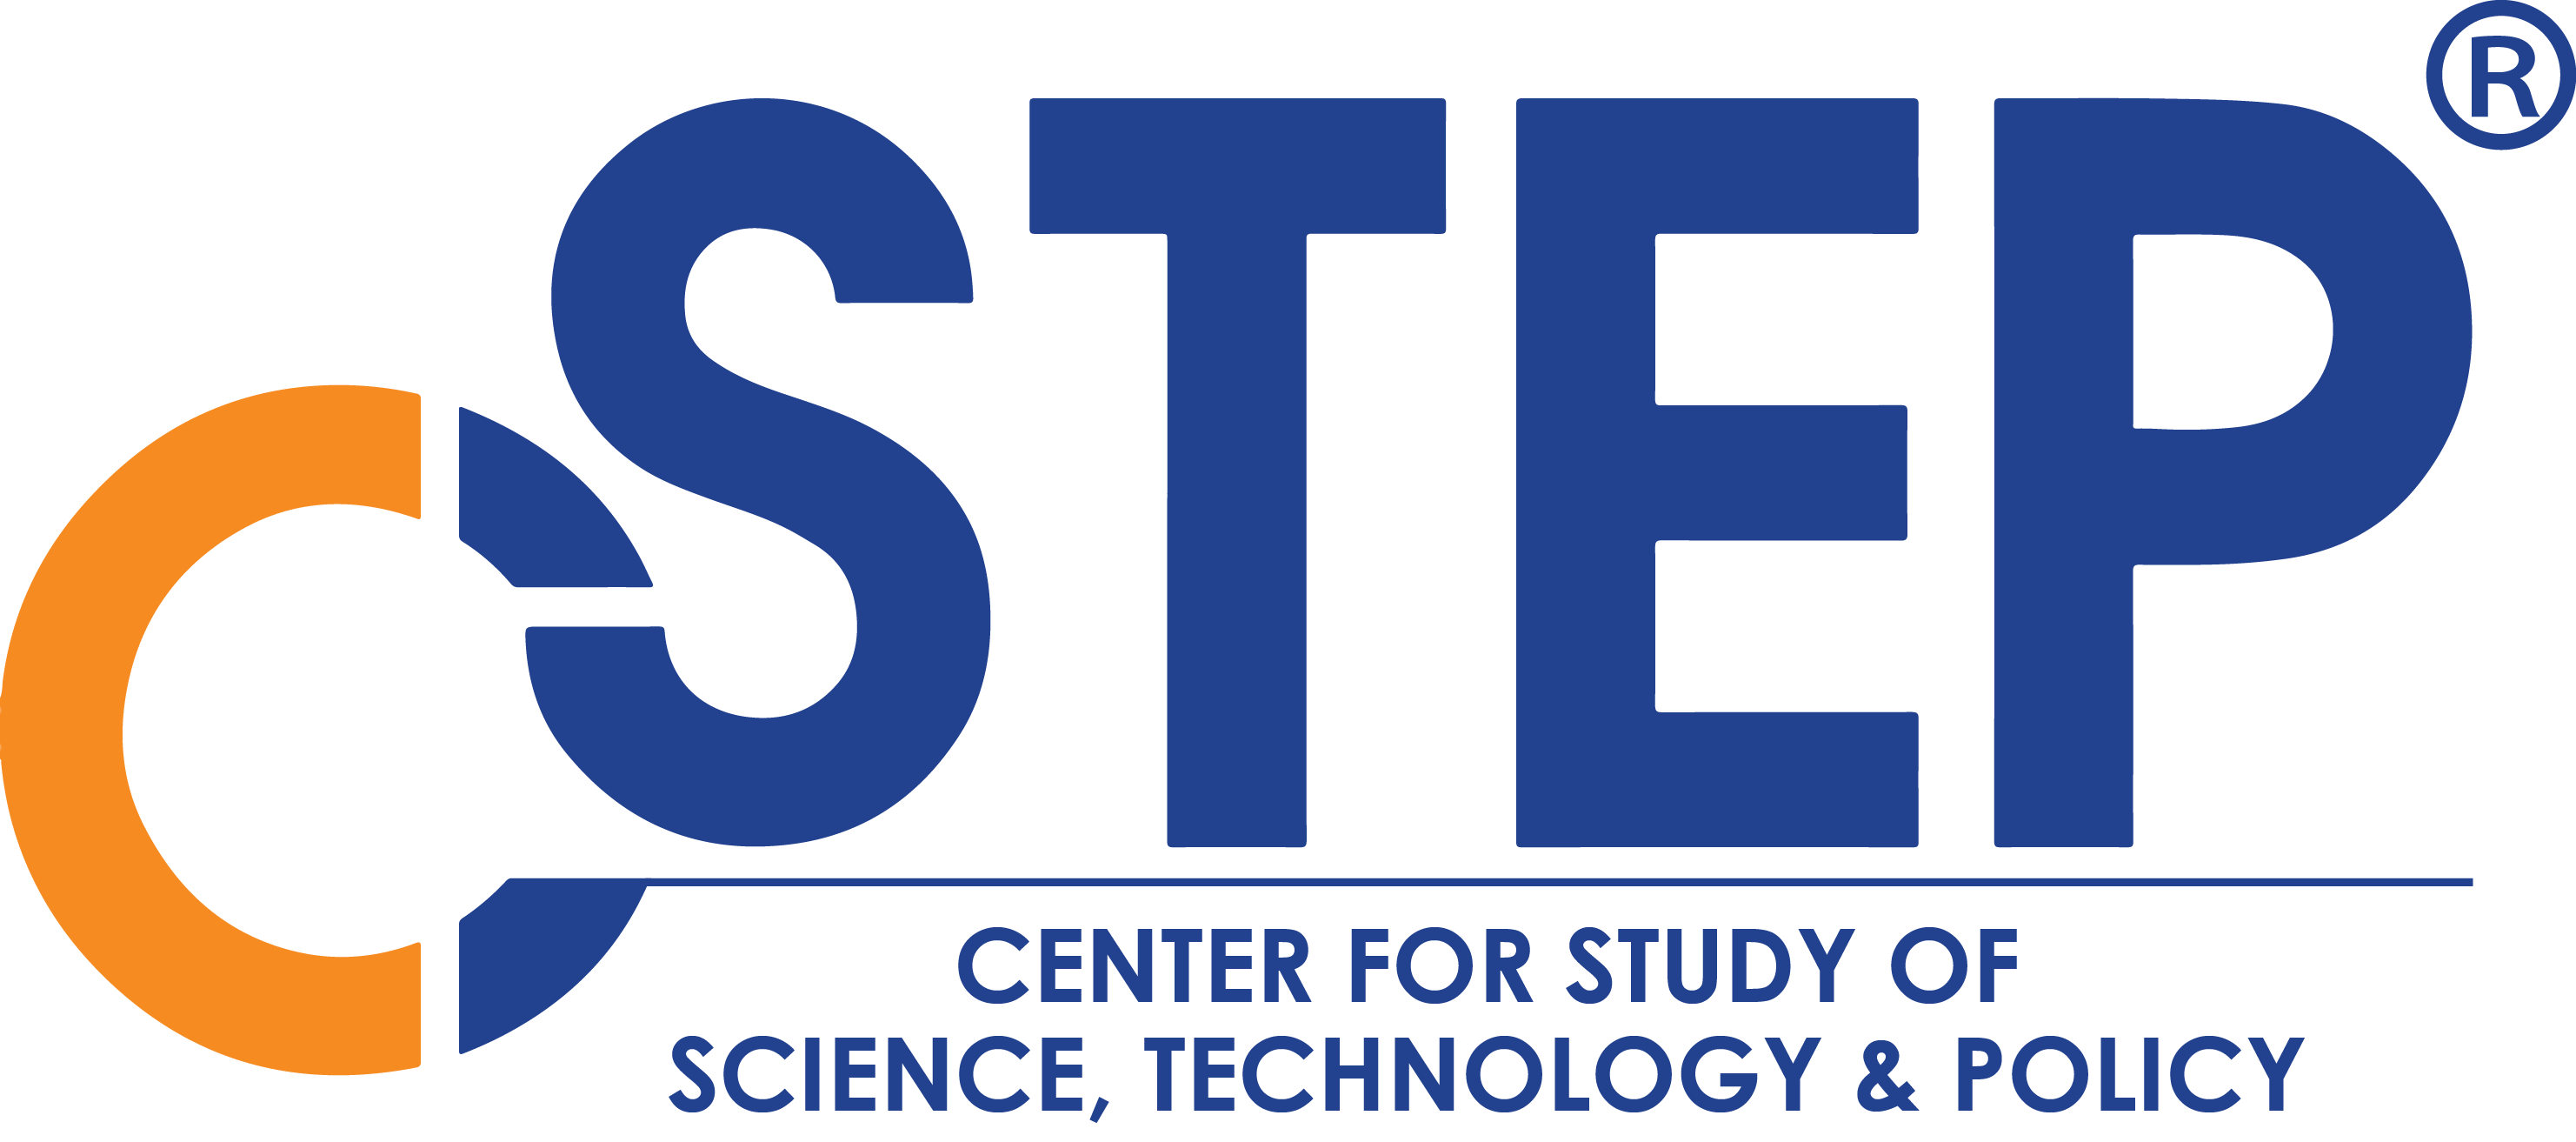 Center For Study Of Science Technology And Policy logo